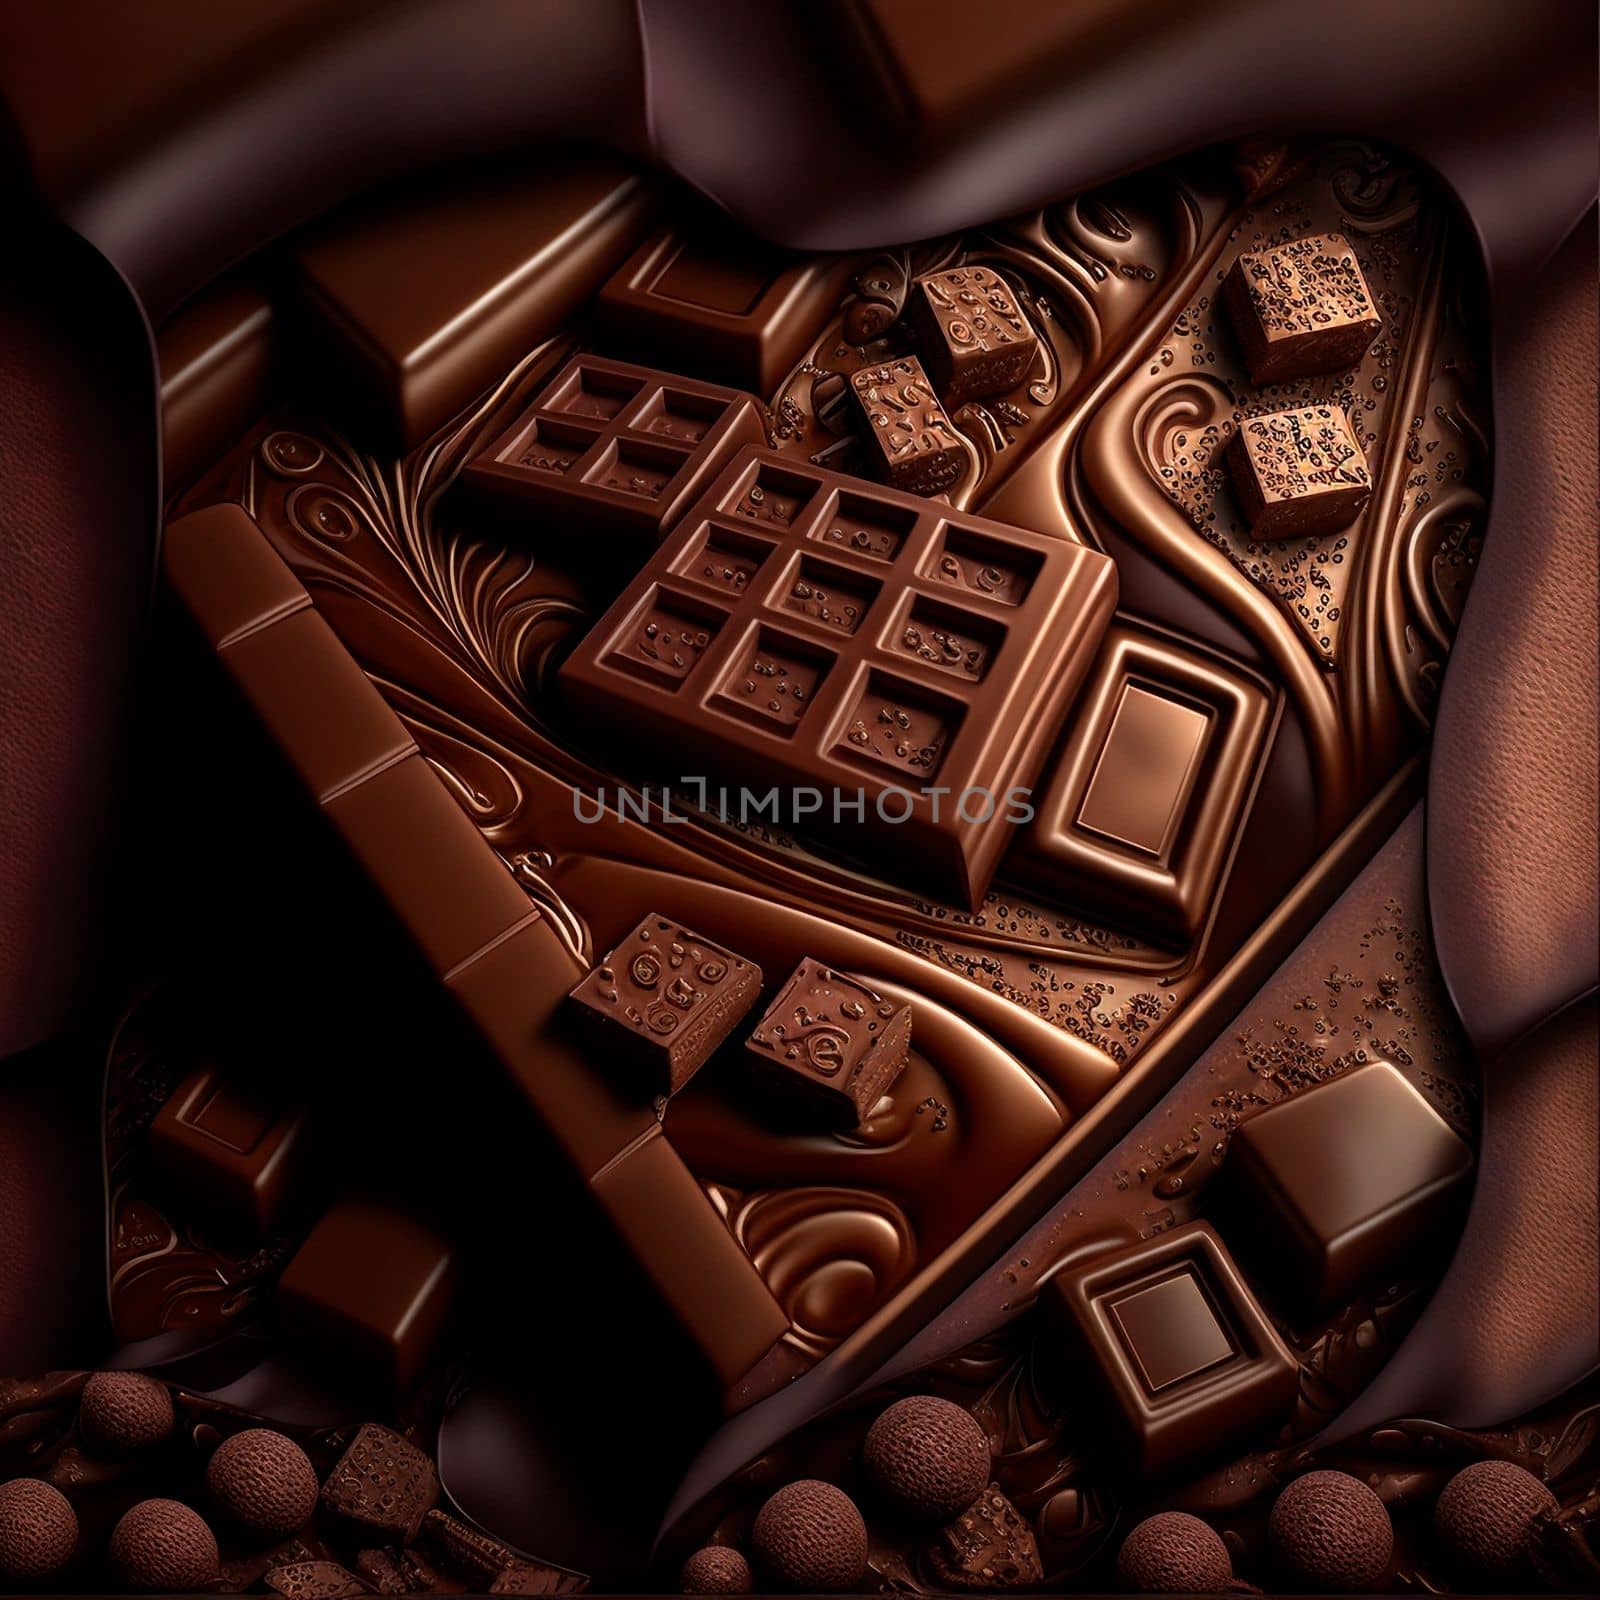 illustration of beautiful chocolate platter by NeuroSky